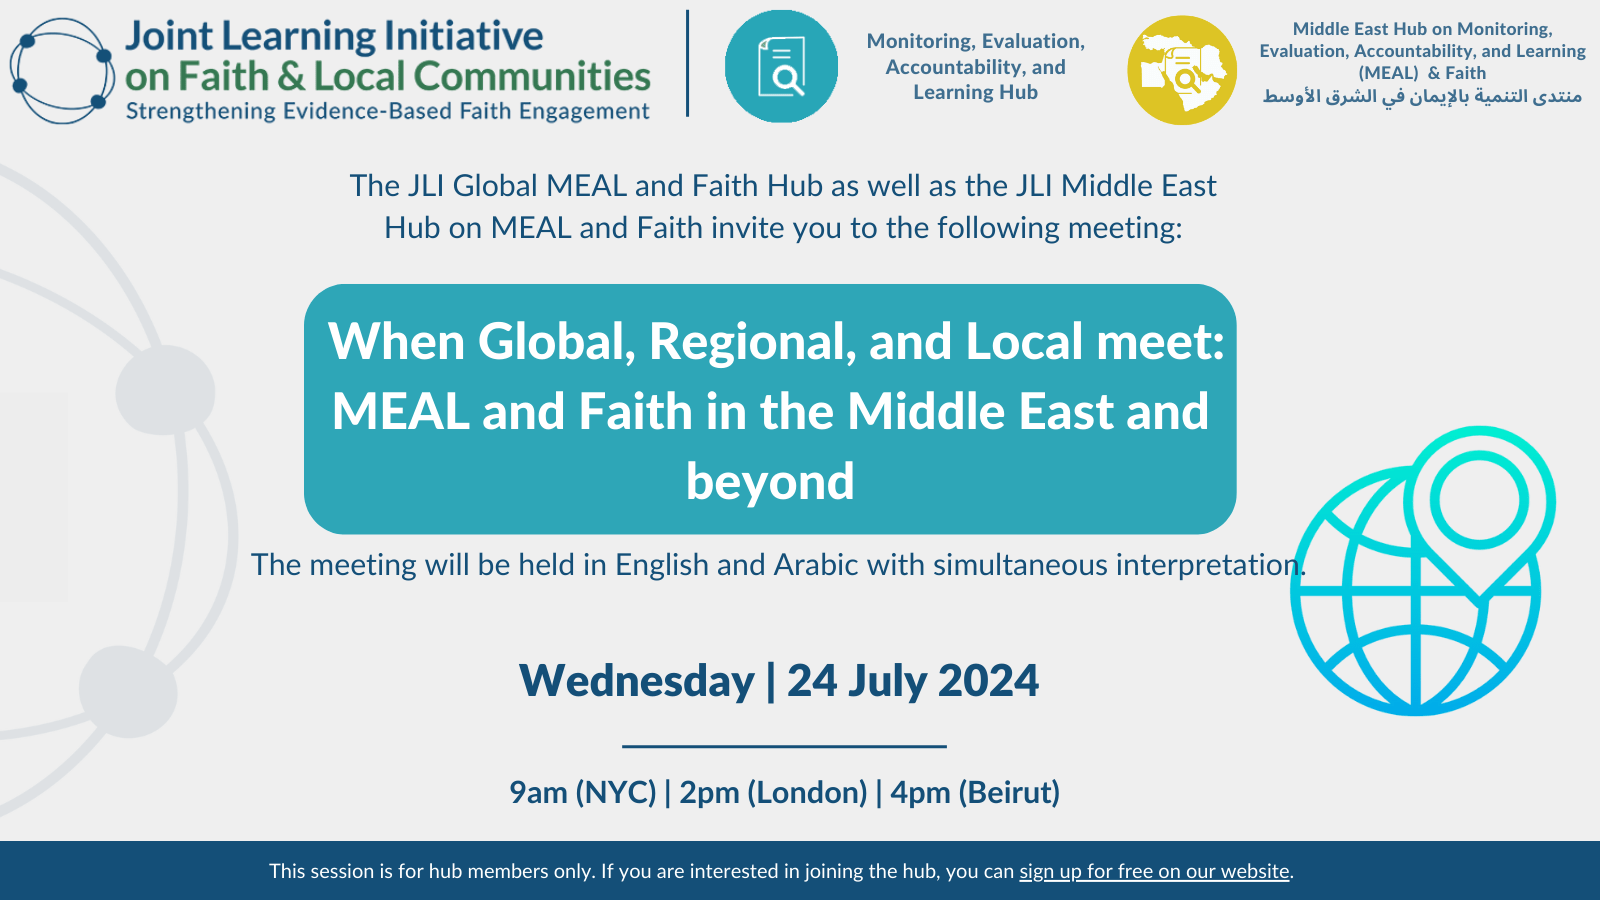 When Global, Regional, and Local meet: MEAL and Faith in the Middle East and beyond